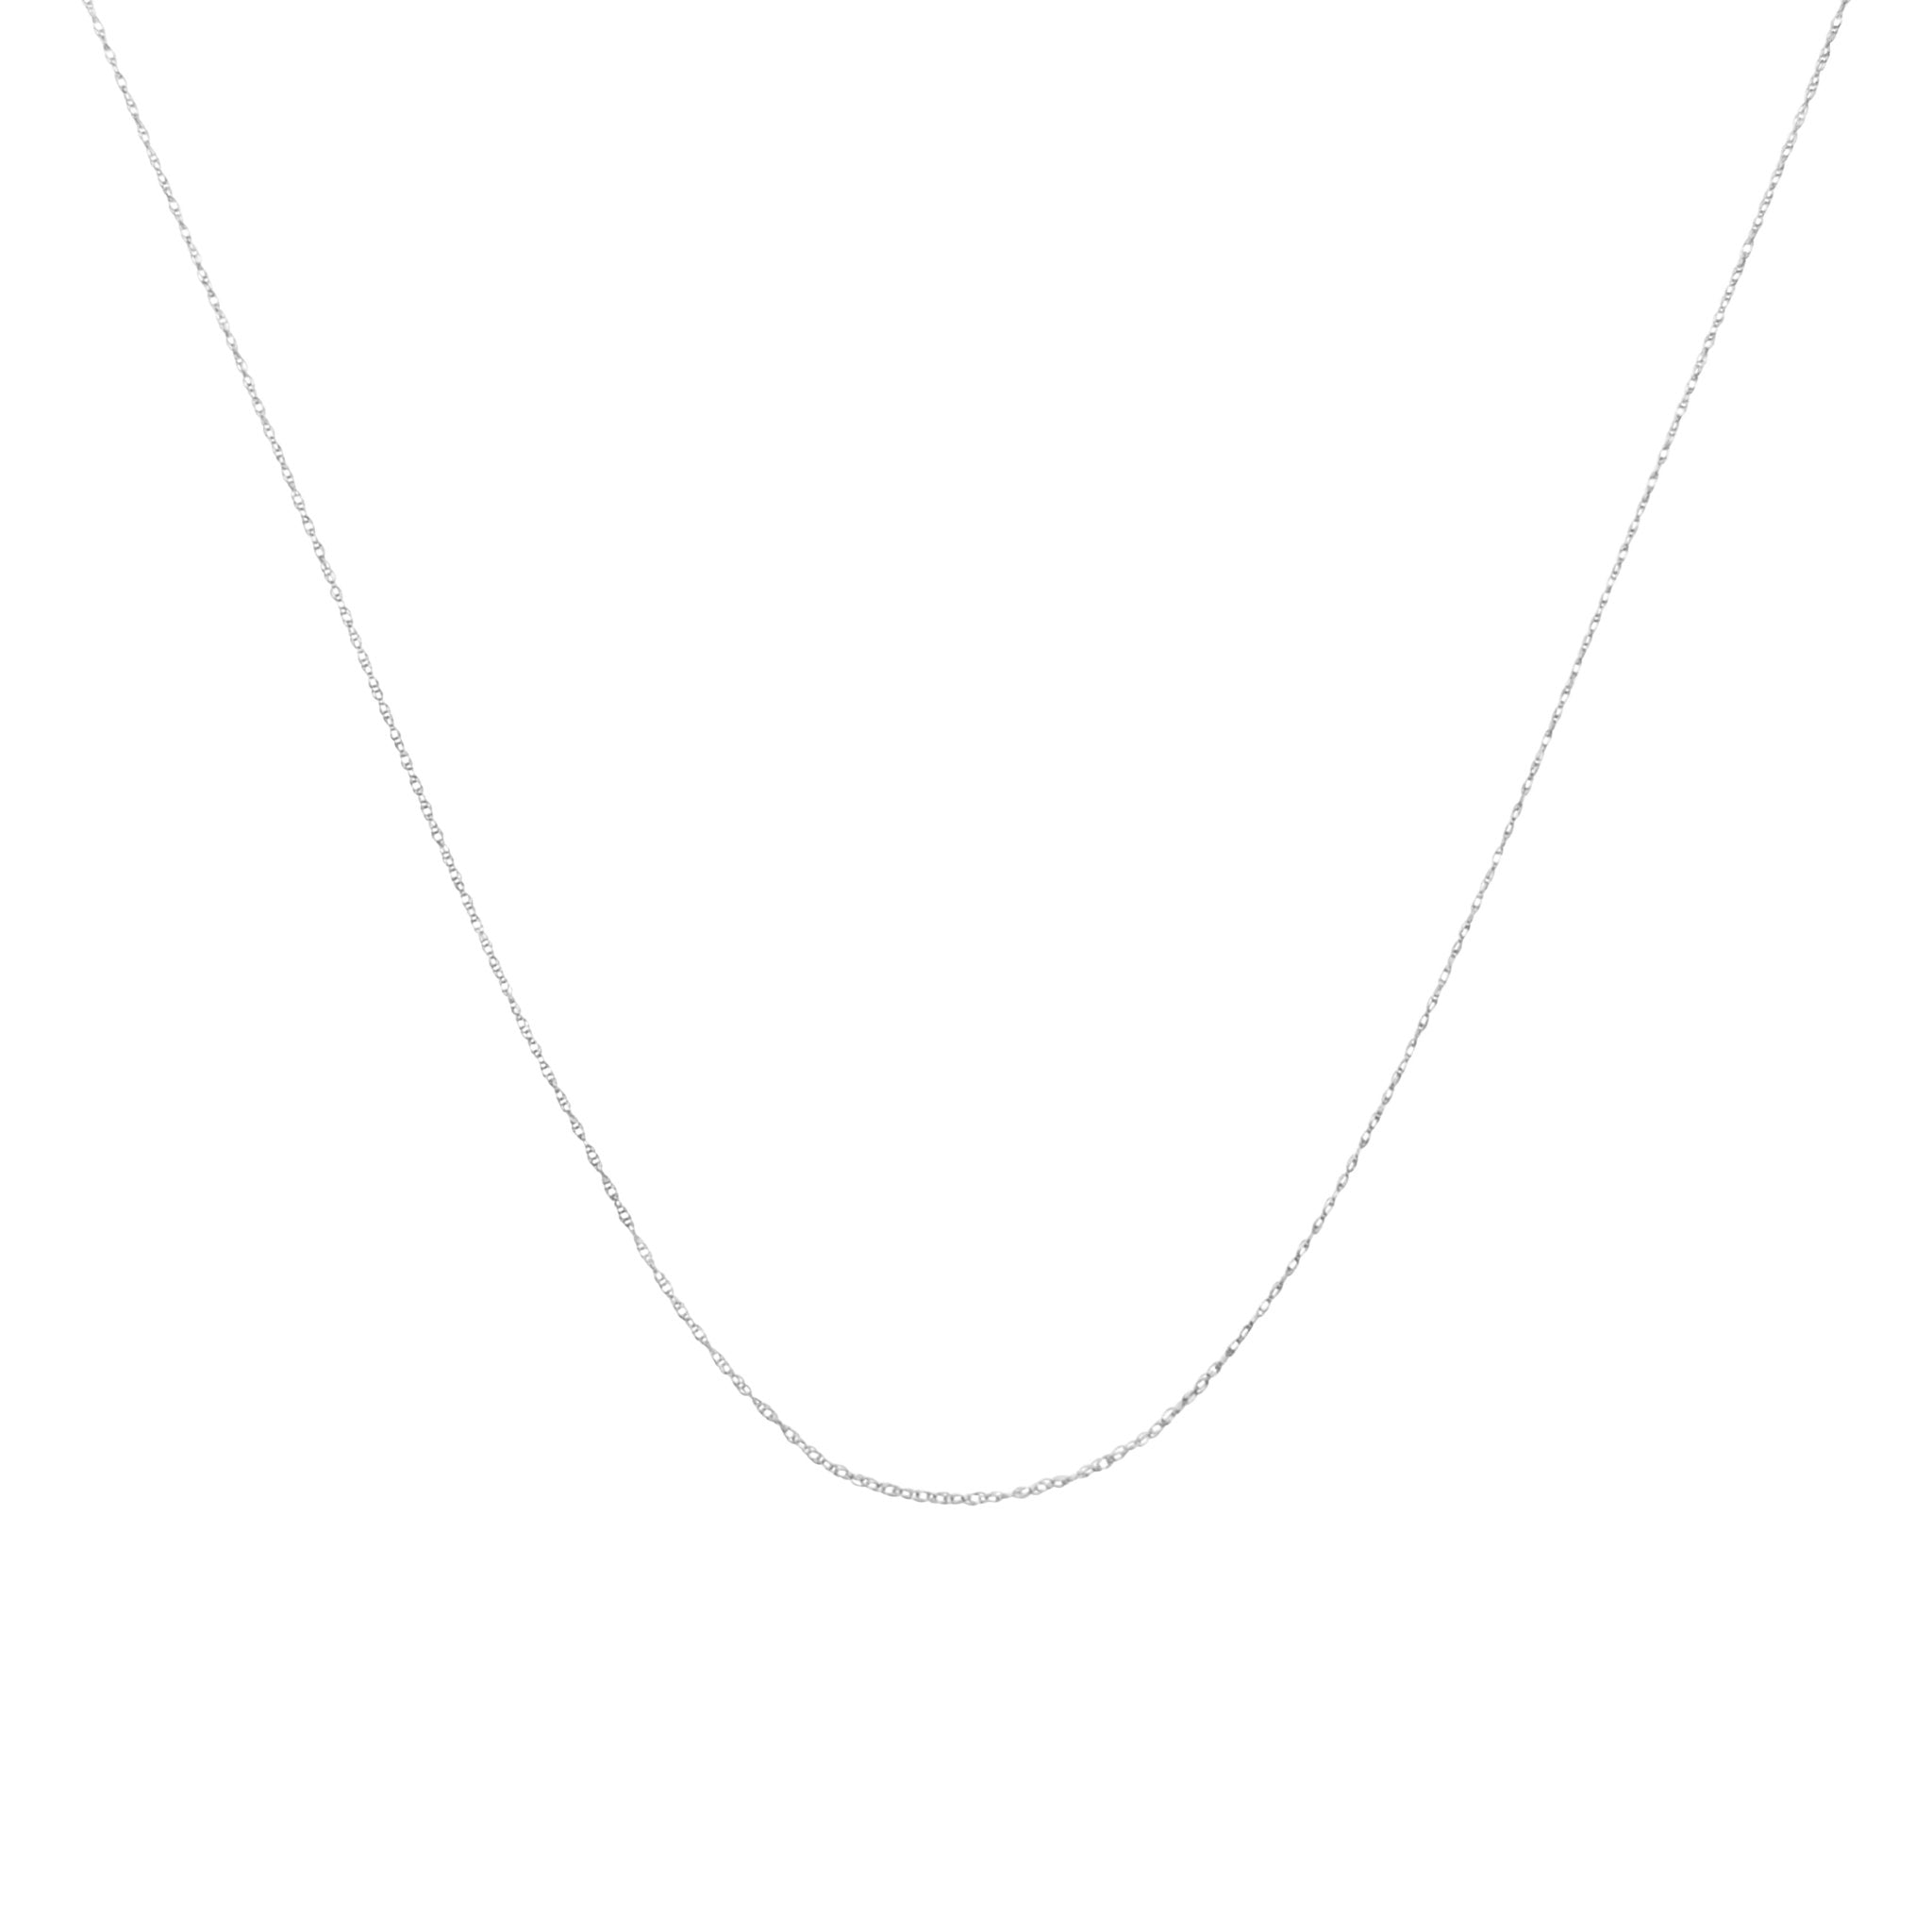 Solid 10K White Gold 0.5Mm Rope Chain Necklace. Unisex Chain - Size 20